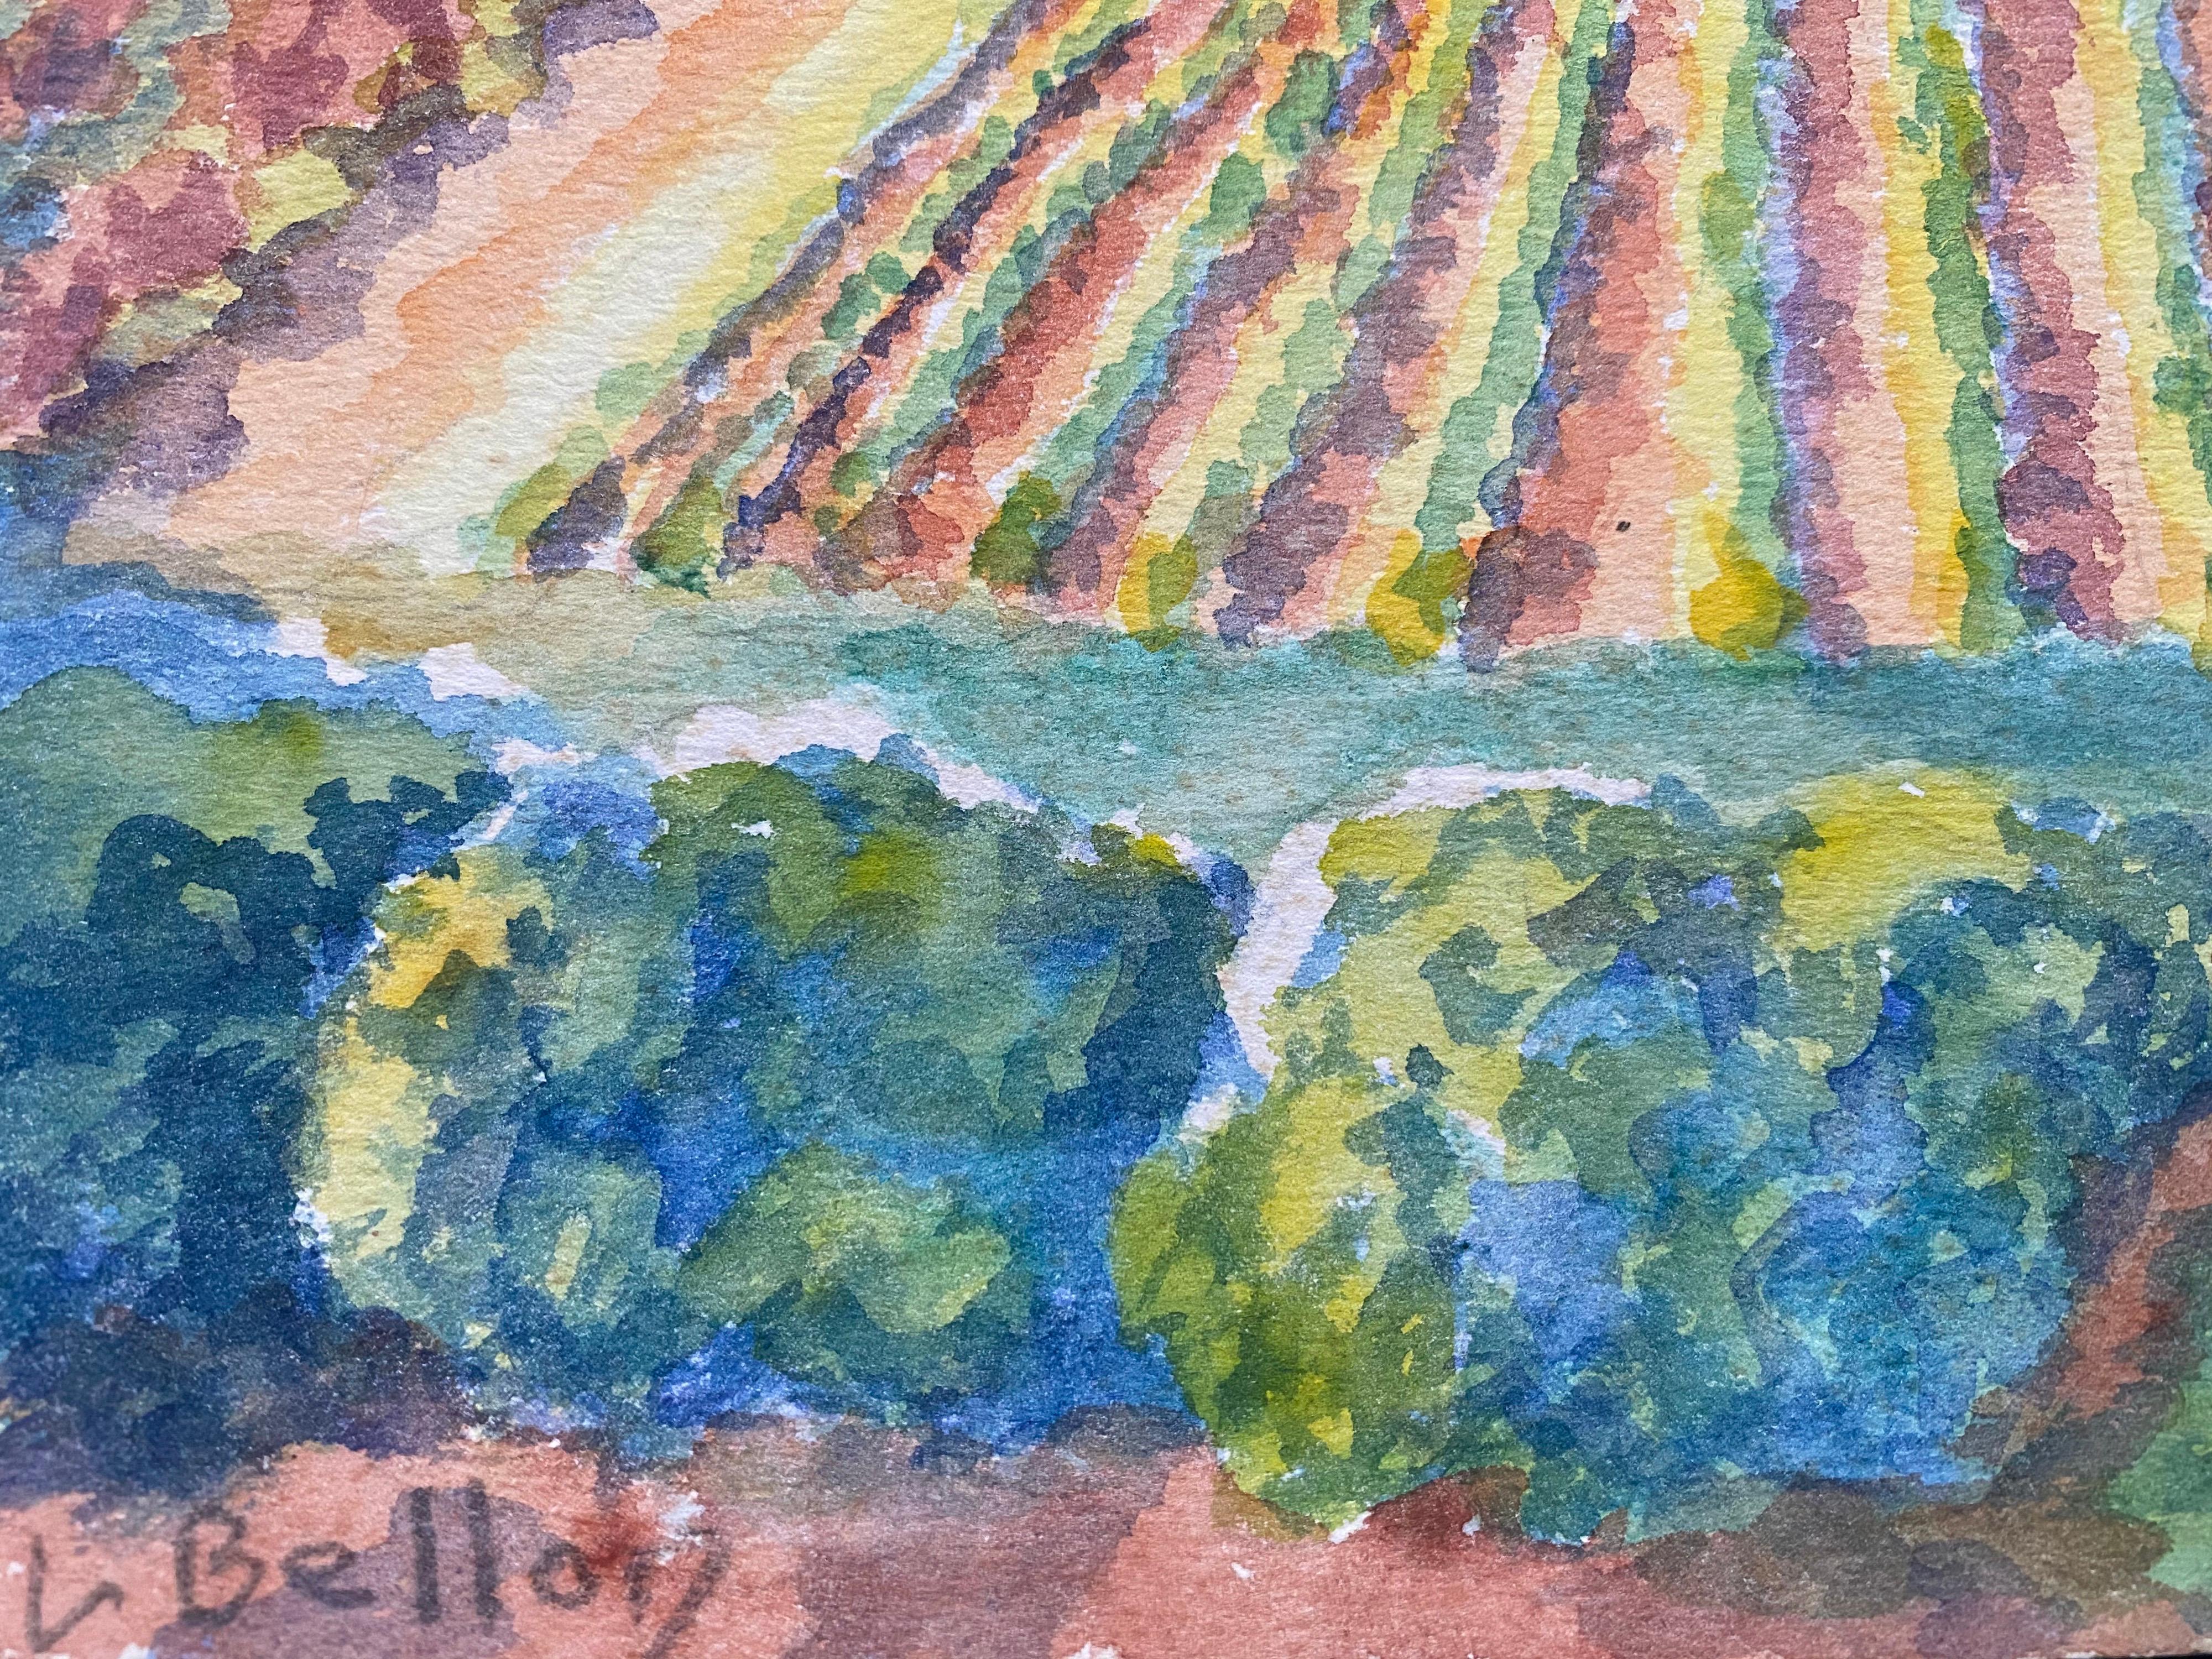 Provencal Landscape
by Louis Bellon (French 1908-1998)
signed
inscribed verso
From a batch of similar work where most were dated 1942-1947
watercolour painting on paper, unframed

measurements: 10 x 14 inches

provenance: private collection of the